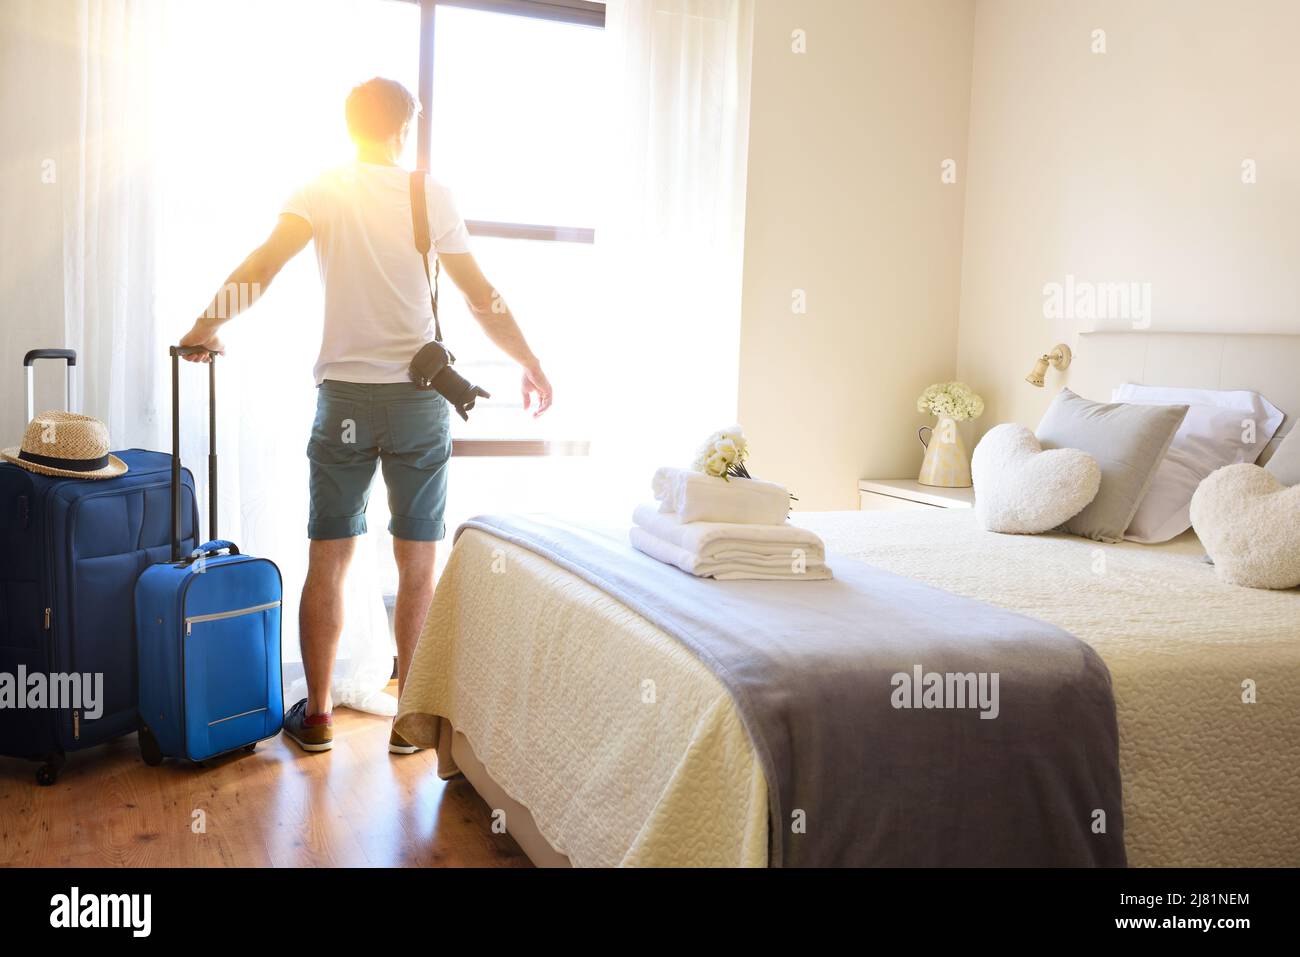 Man on vacation with suitcases on his backs looking out a window in a bright hotel room. Stock Photo